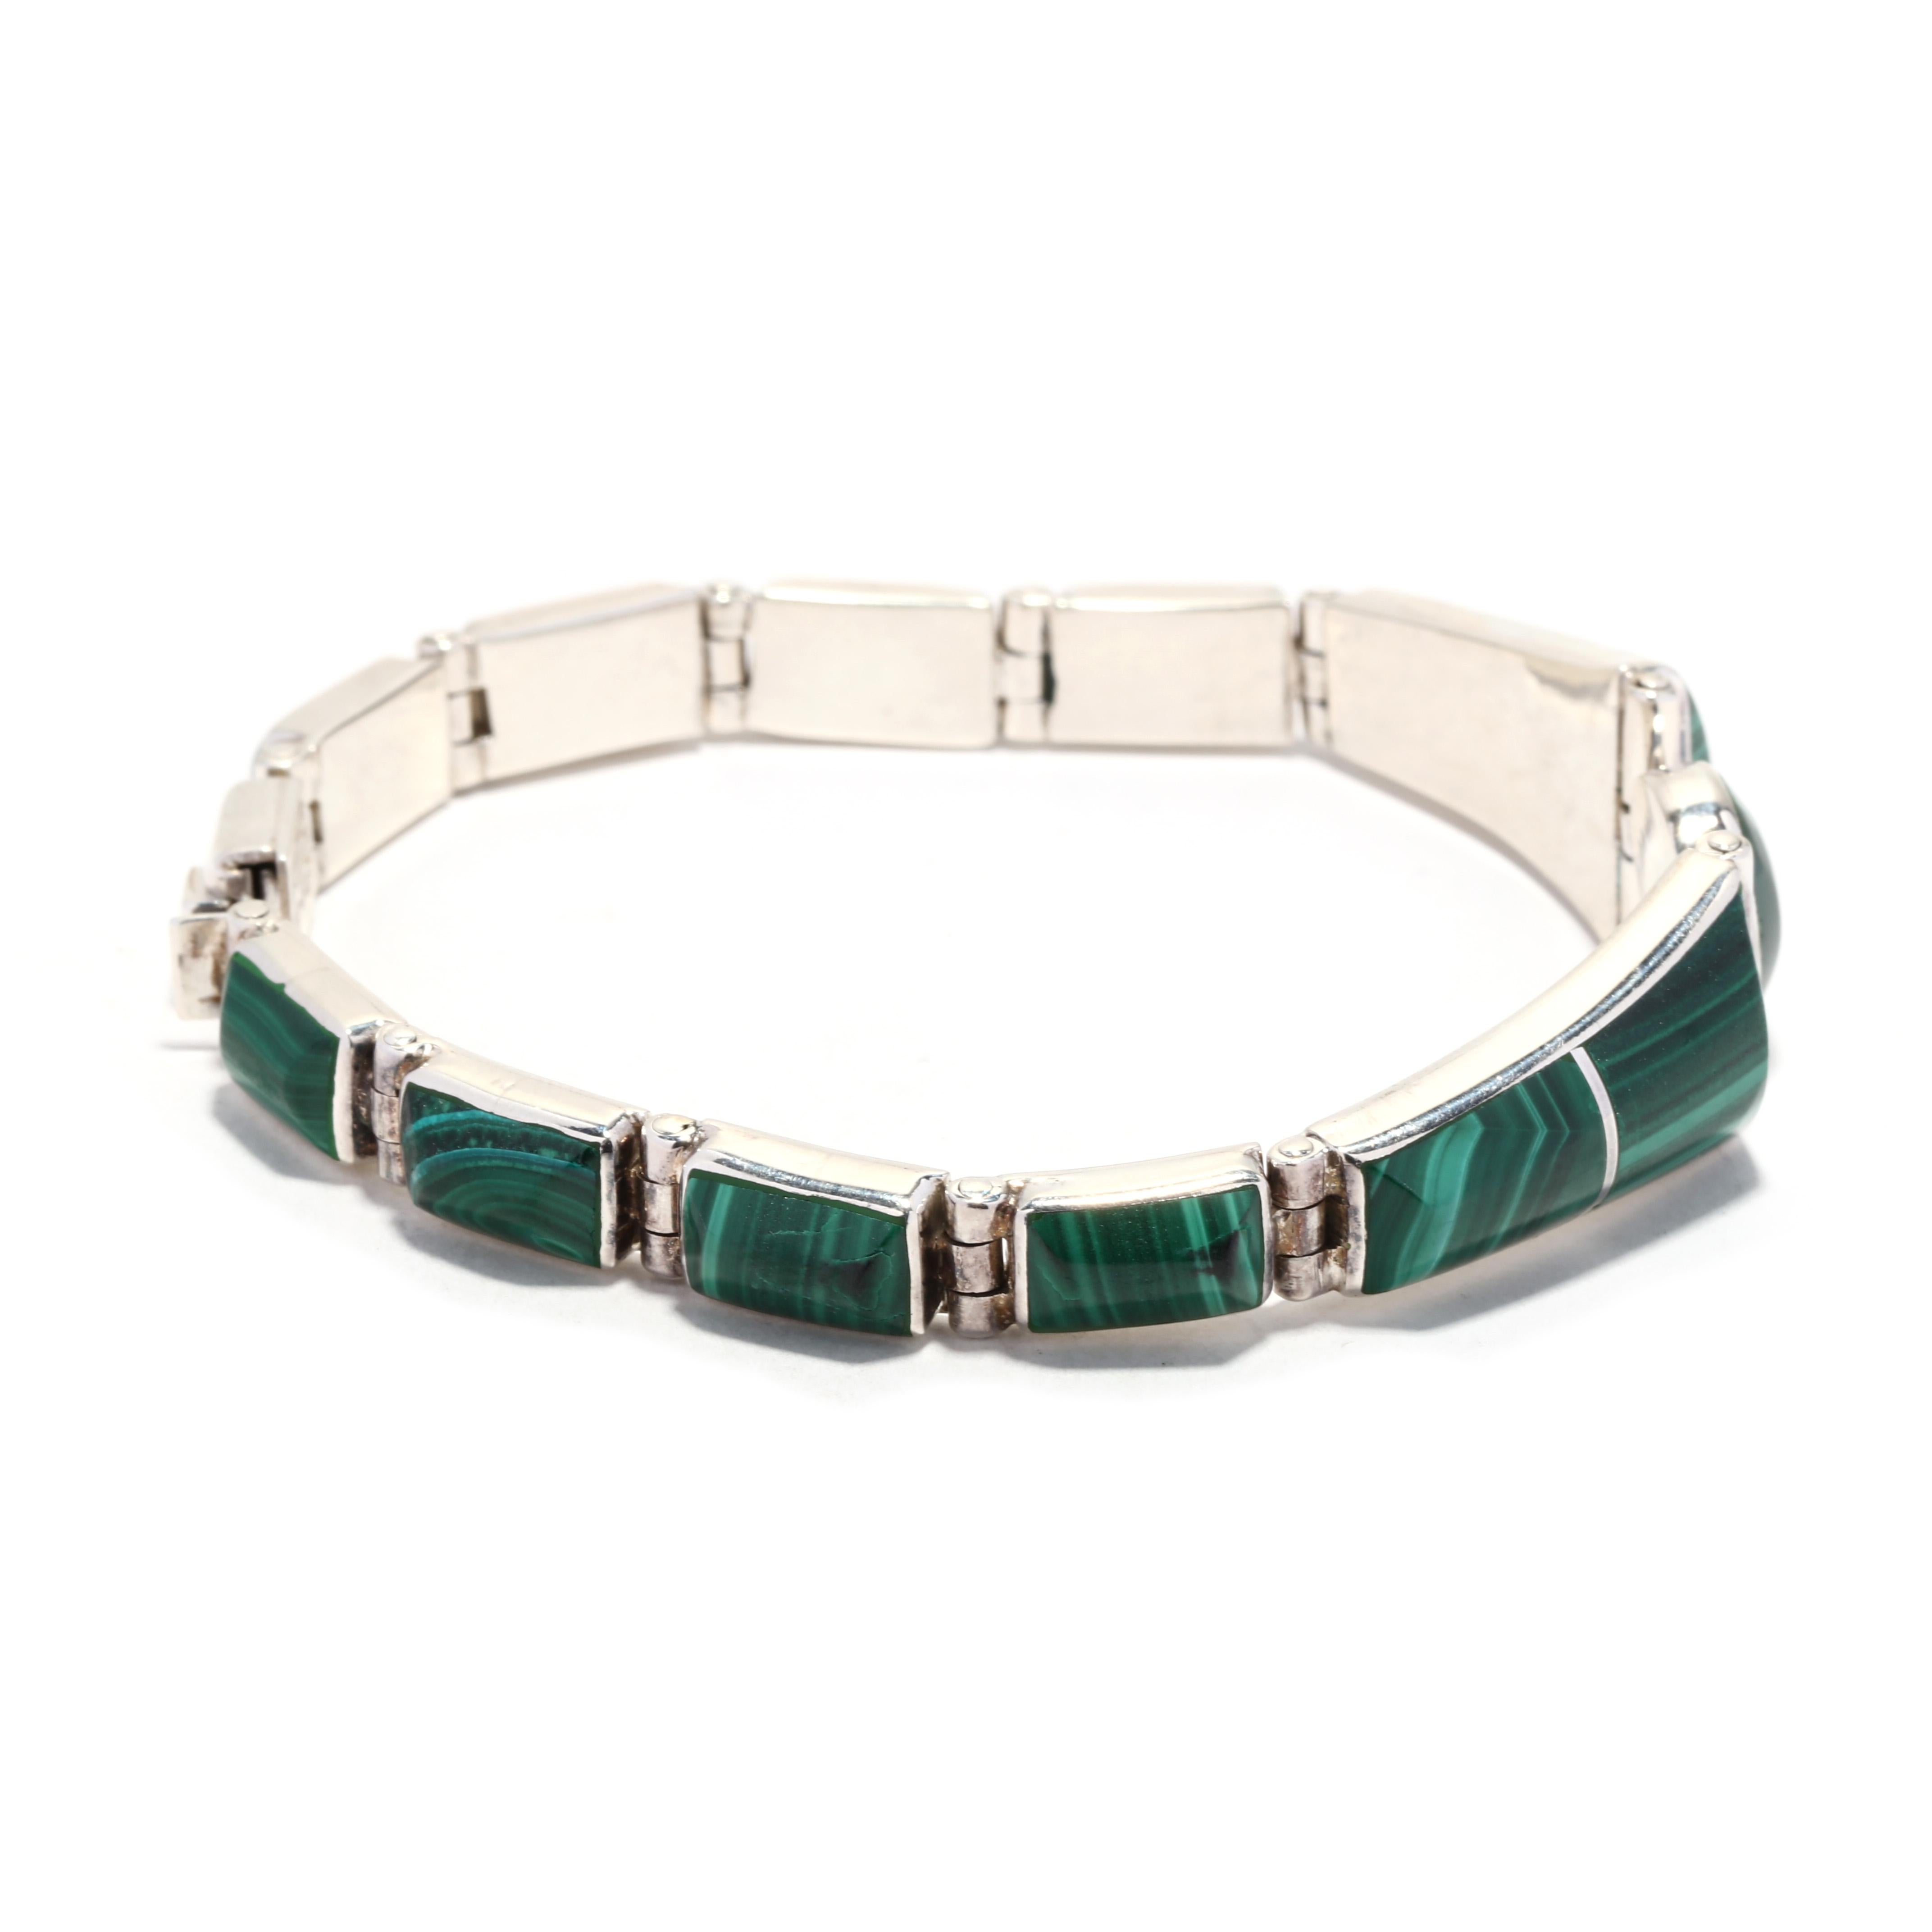 This Vintage Inlaid Malachite Bracelet is made from sterling silver and is 7.5 inches in length. It features elaborately inlaid Malachite in a unique and eye-catching design. This stunning piece of Mexican silver jewelry will add an exquisite and